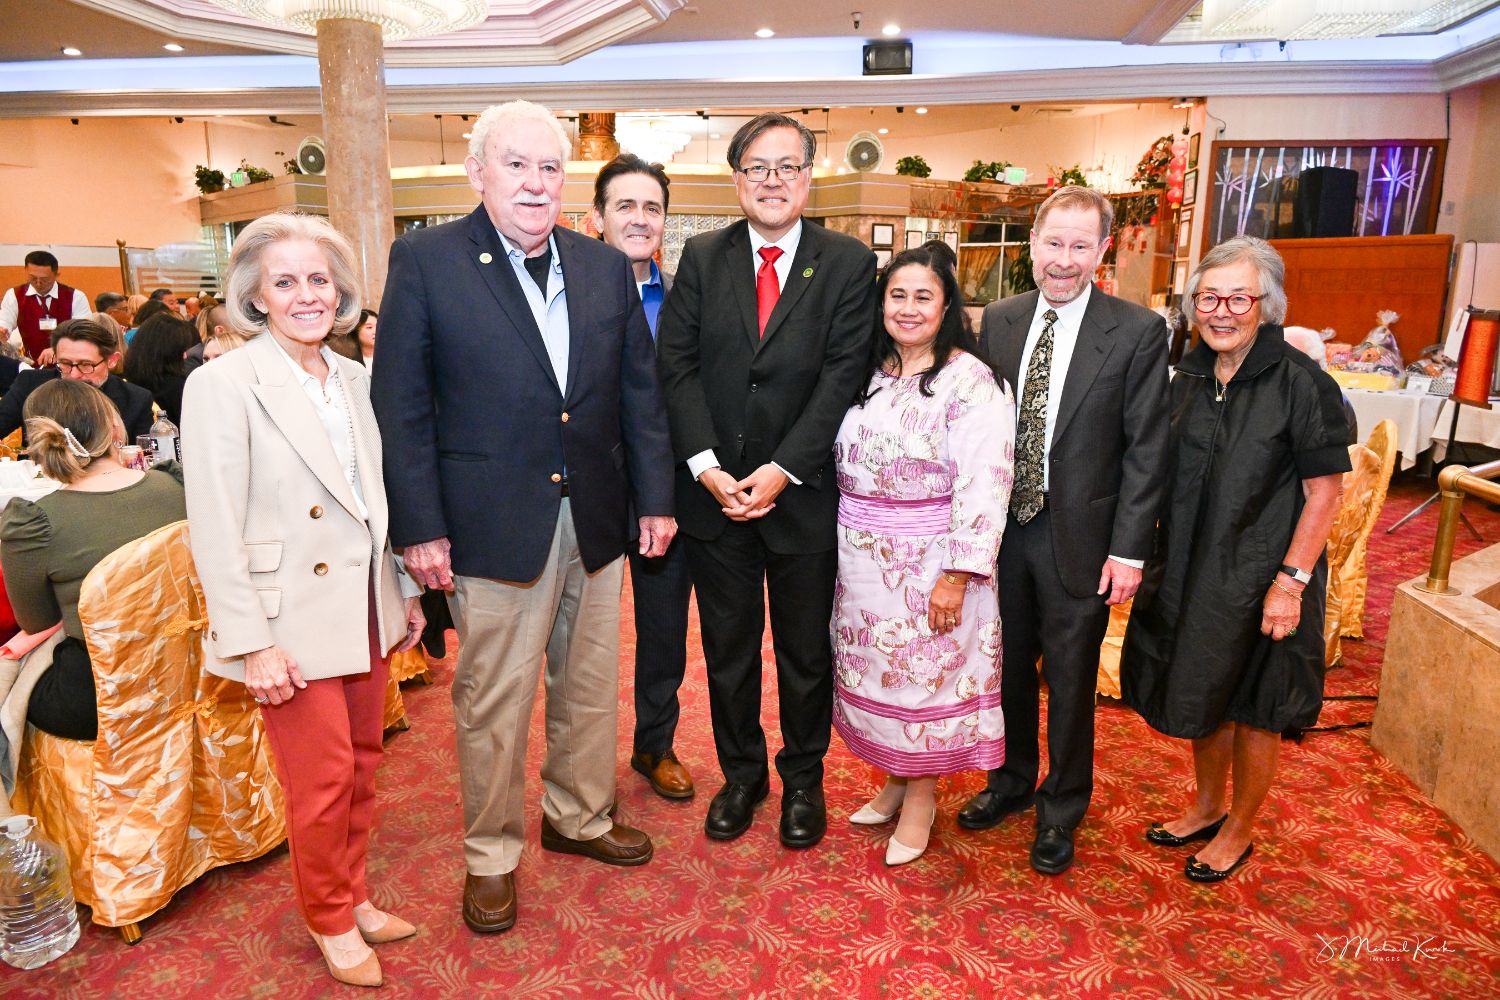 PHOTO: J. Michael Kwok | The South Pasadenan | Officials pose for a photo at the SPCC Gala Chinese Banquet with Assemblymember Mike Fong, District 49, who represents South Pasadena. From L-R are Janet Braun, city councilmember; Jack Donovan, mayor pro tem; Michael Cacciotti, city councilmember; Fong; Evelyn Zneimer, mayor; Jon Primuth, city councilmember; and Carol Liu, state senator, SD 25, retired.